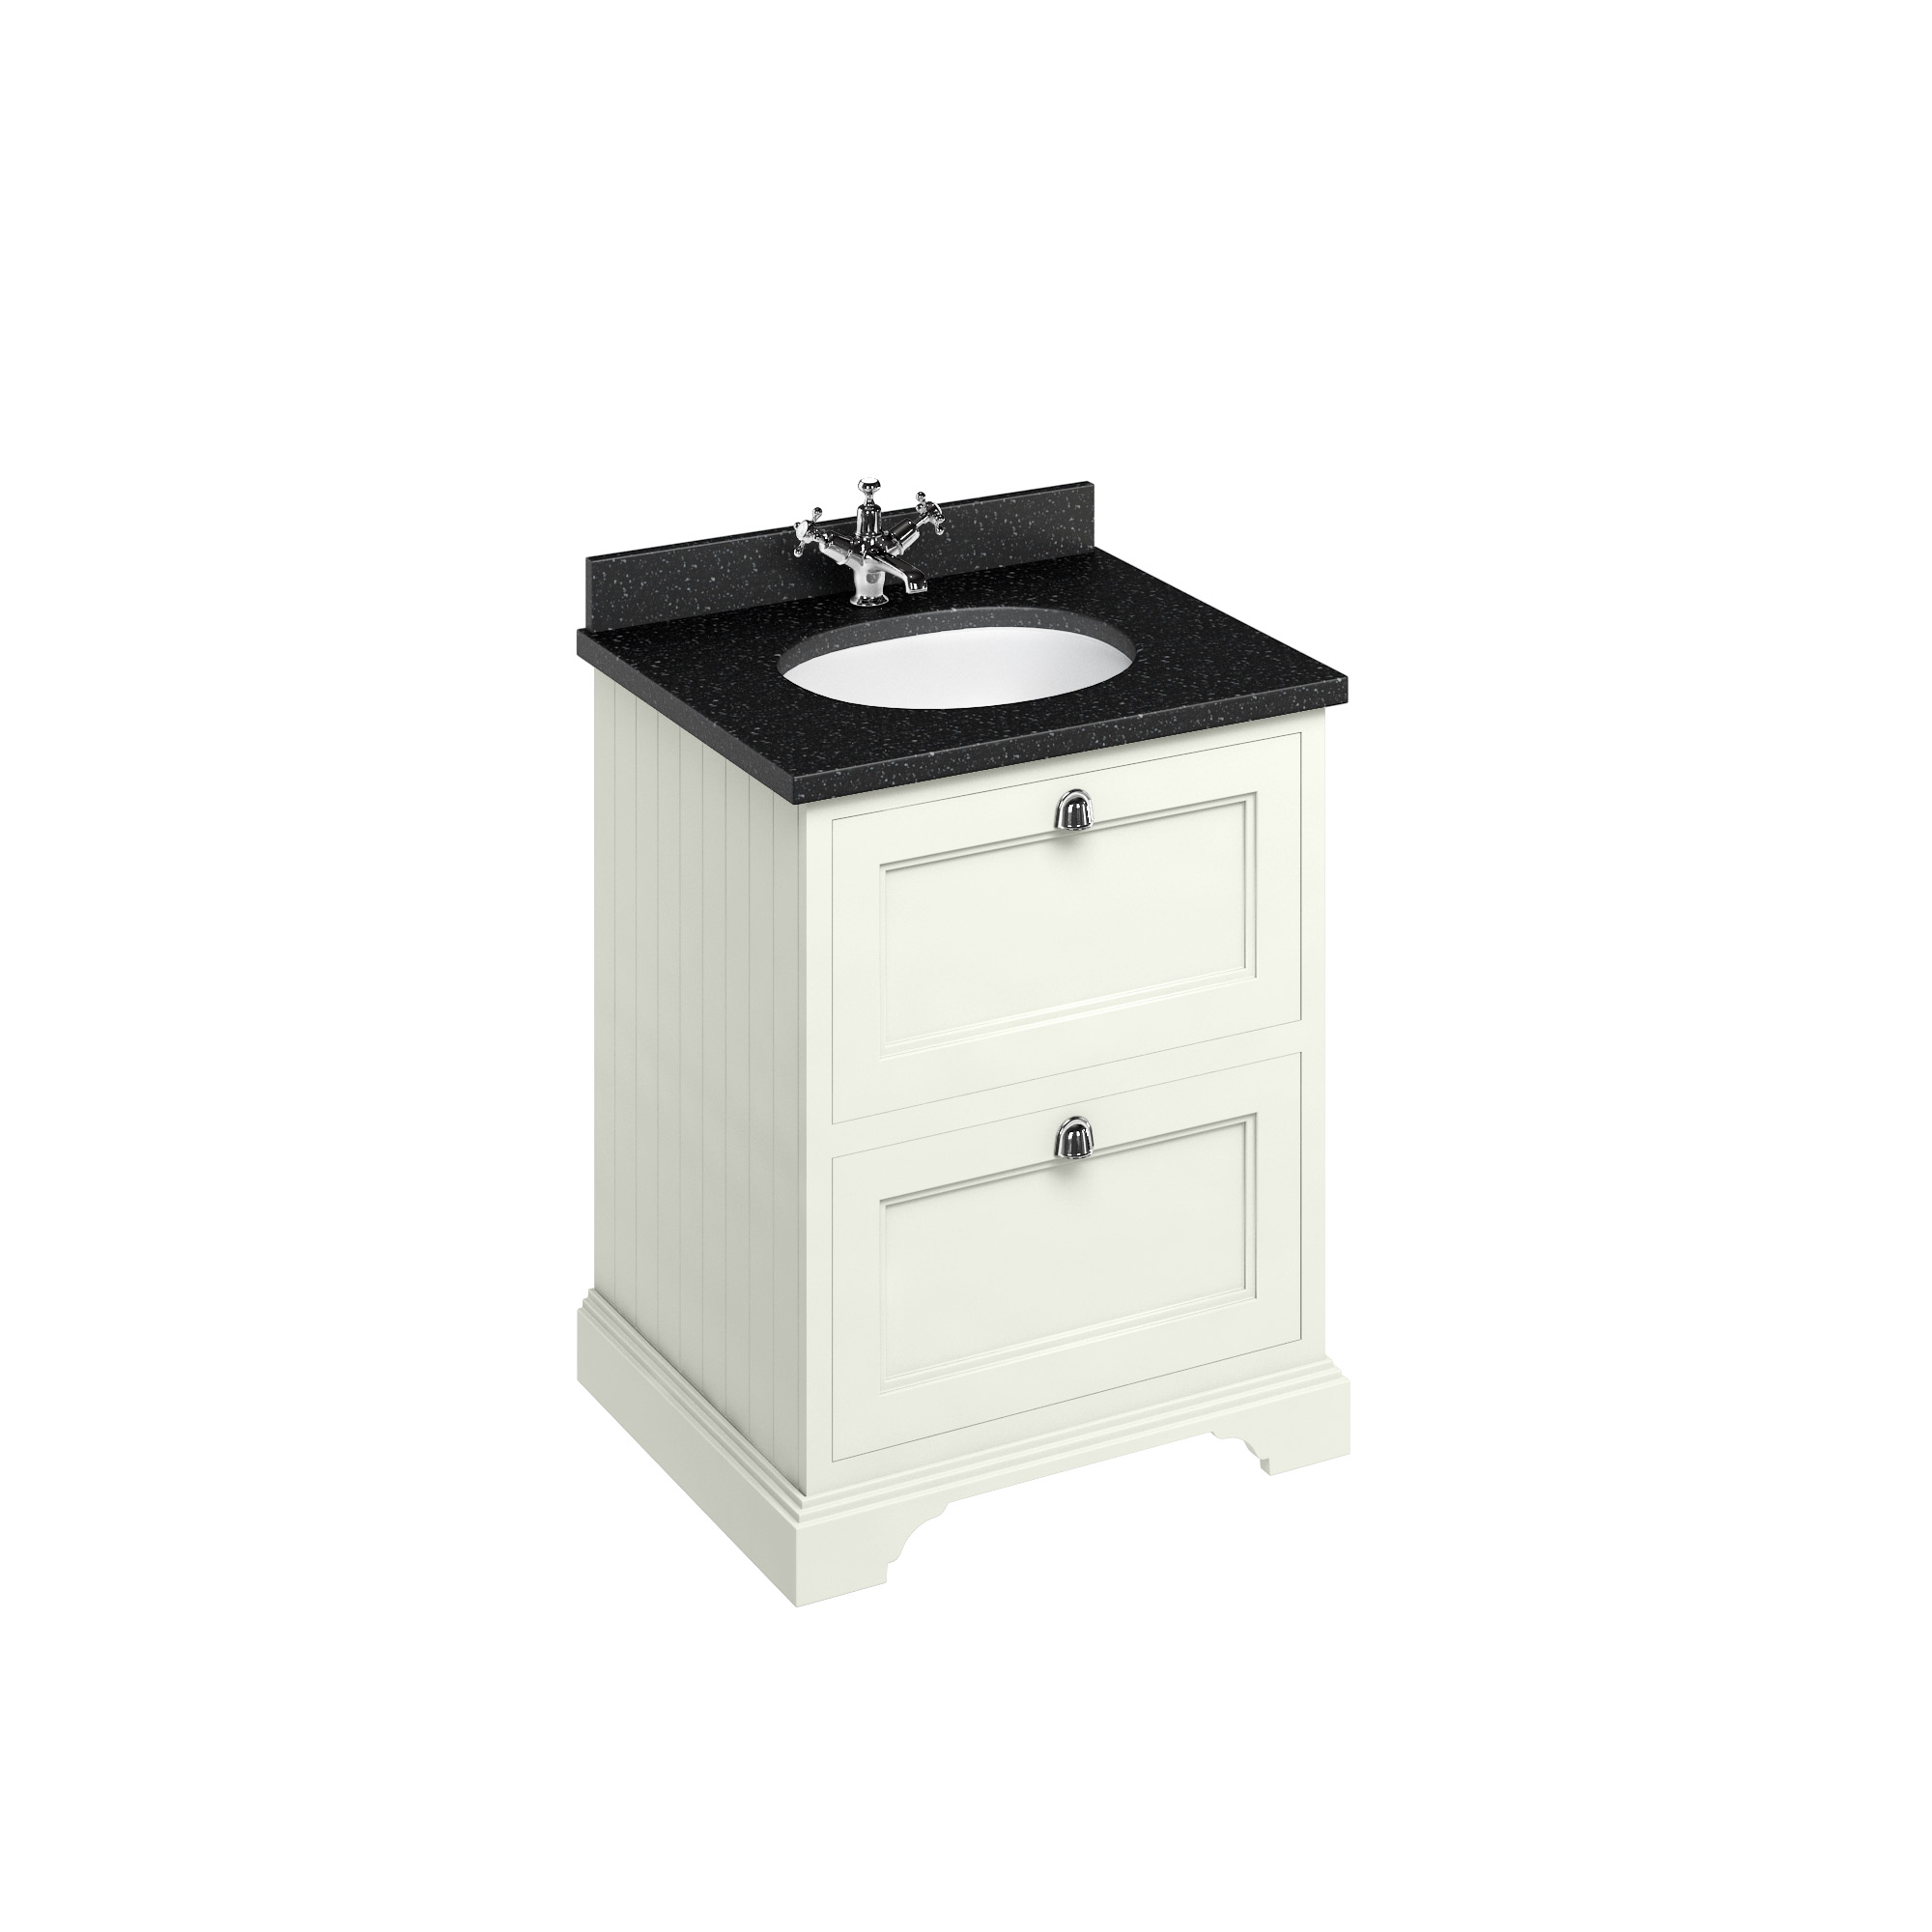 Freestanding 65 Vanity Unit with 2 drawers - Sand and Minerva black granite worktop with integrated white basin